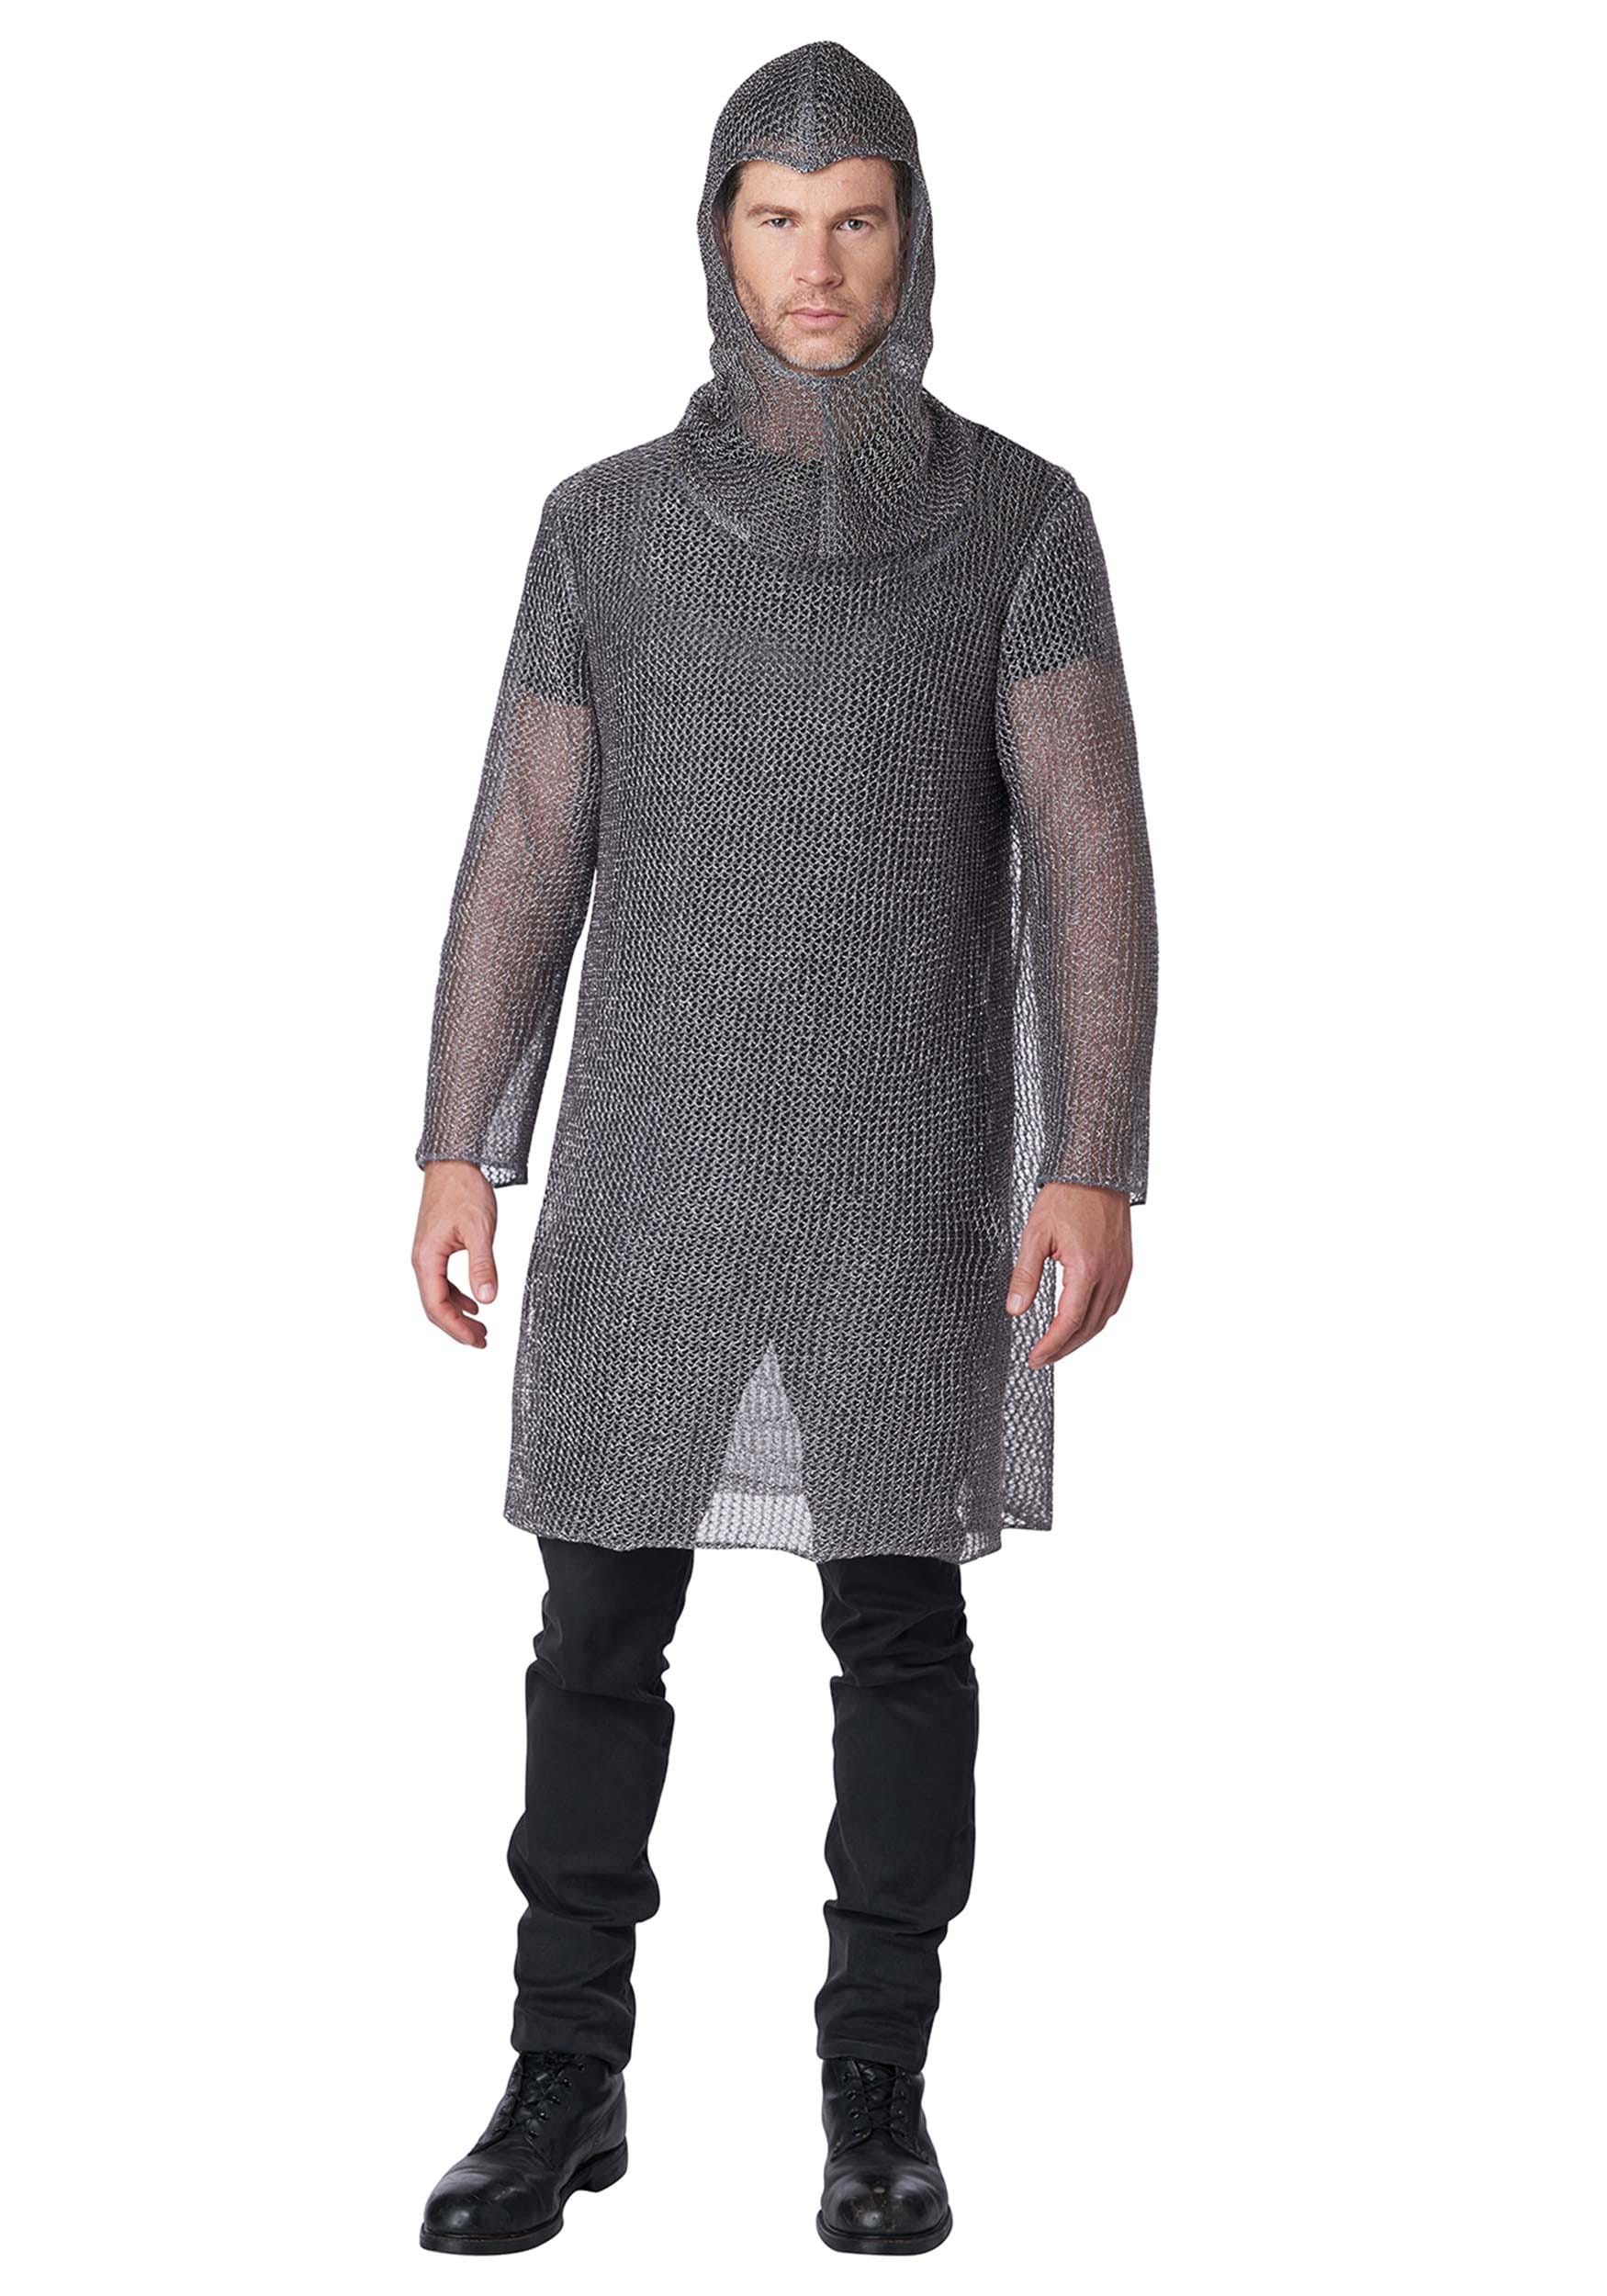 https://images.halloweencostumes.co.uk/products/92223/1-1/adult-metallic-knit-chainmail-tunin-cowl-costume.jpg